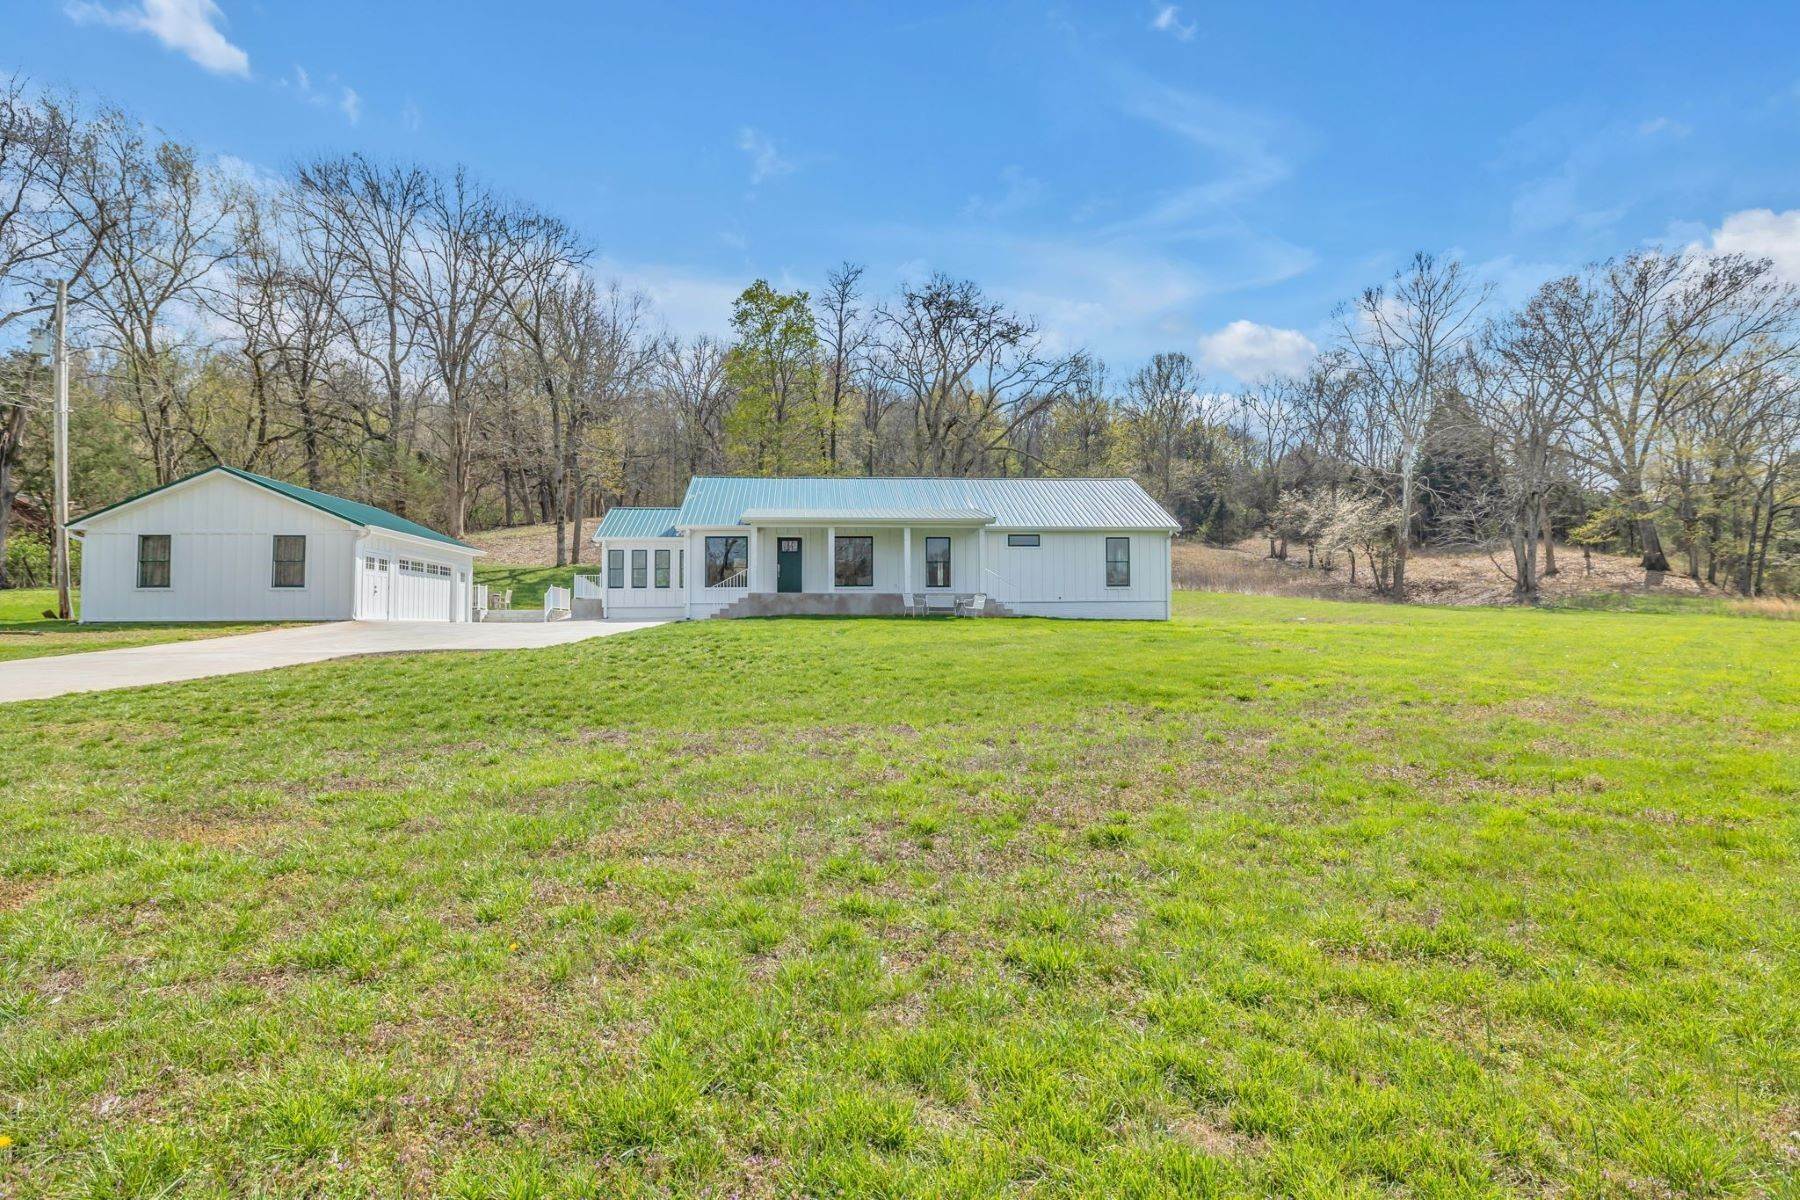 Single Family Homes for Sale at 2928 Eastover Rd, Watertown, TN, 37184 2928 Eastover Rd Watertown, Tennessee 37184 United States